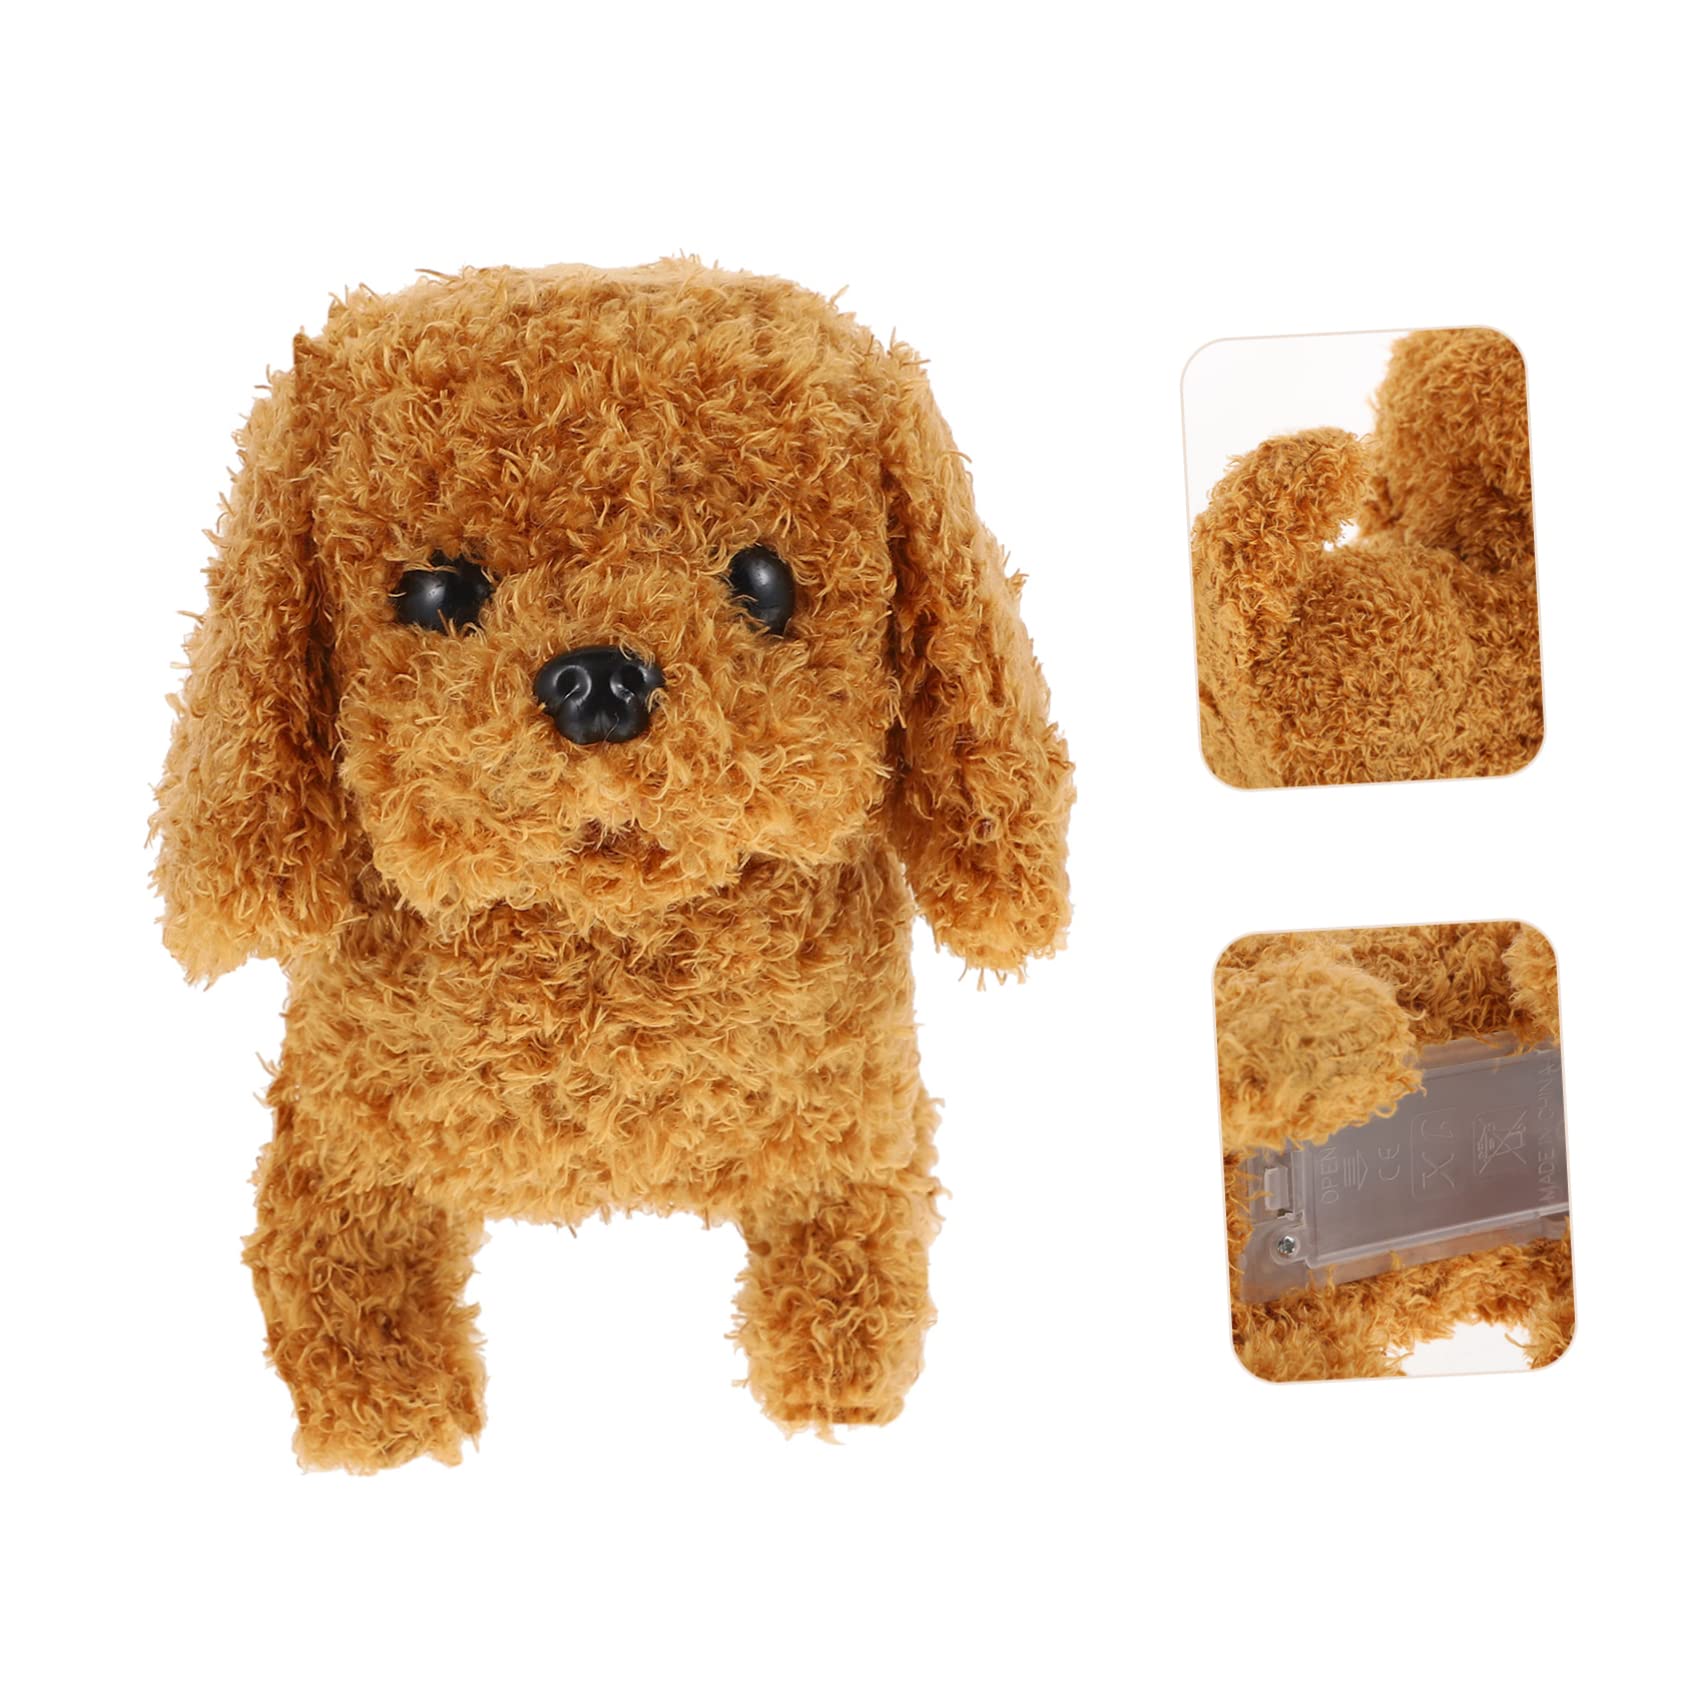 ERINGOGO 2 Pcs Simulation Electric Dog Puppy Toys for Kids Interactive Puppy Toys Stuffed Electronic Animals Rc Interactive Toy Dogs It Will Be Called Plush Toy Pp Cotton Child